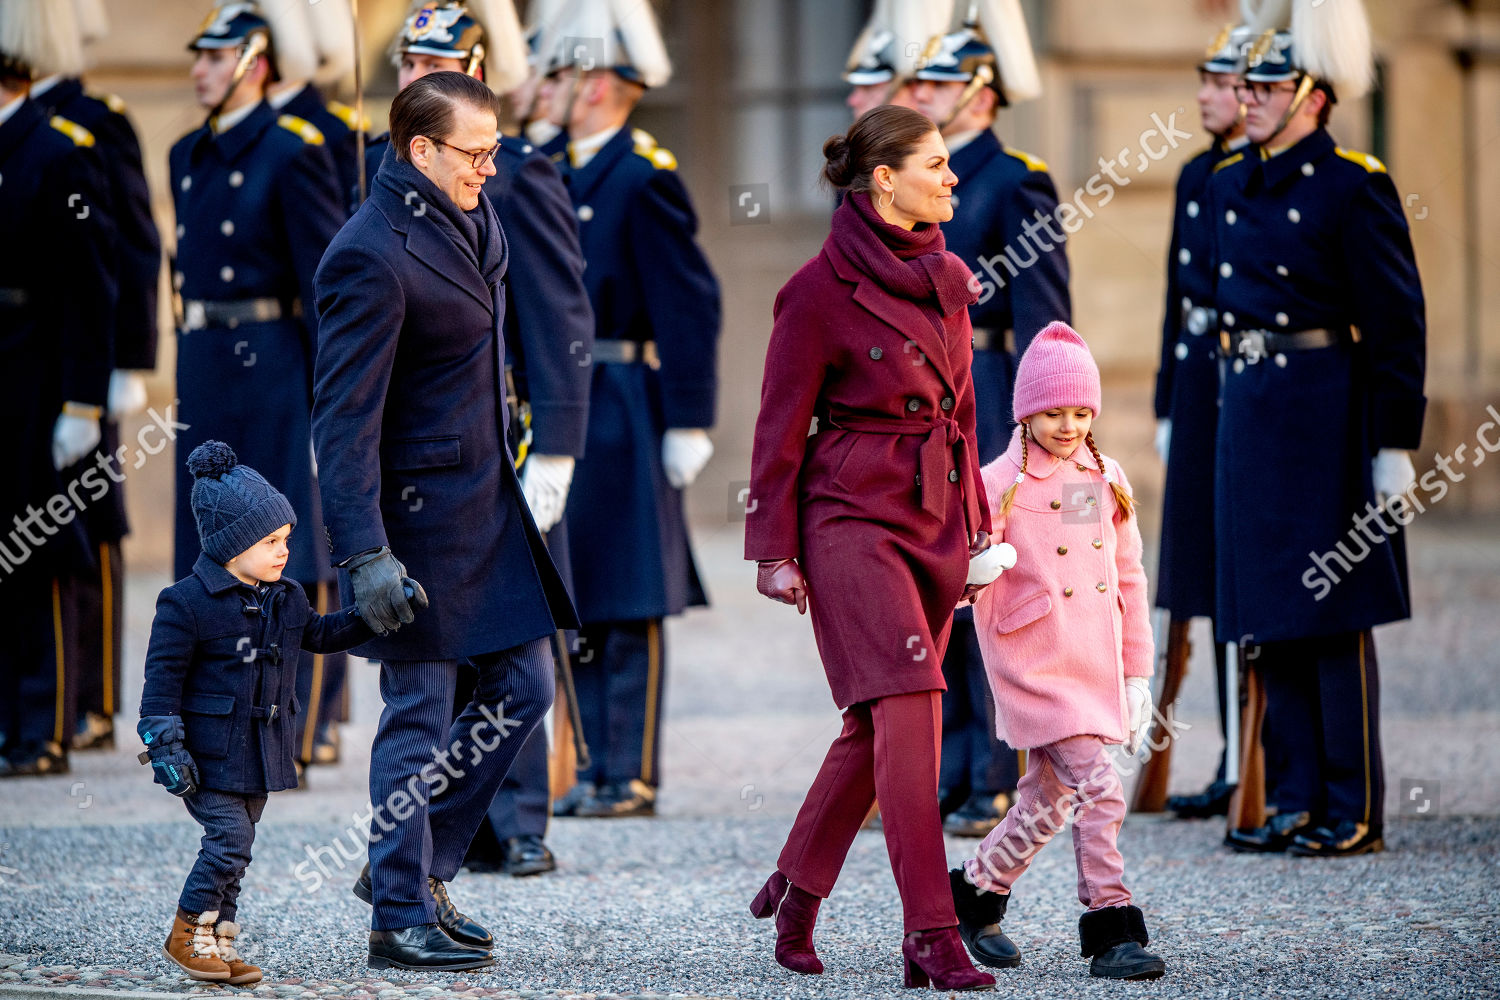 crown-princess-victoria-name-day-celebrations-stockholm-sweden-shutterstock-editorial-10151872aa.jpg